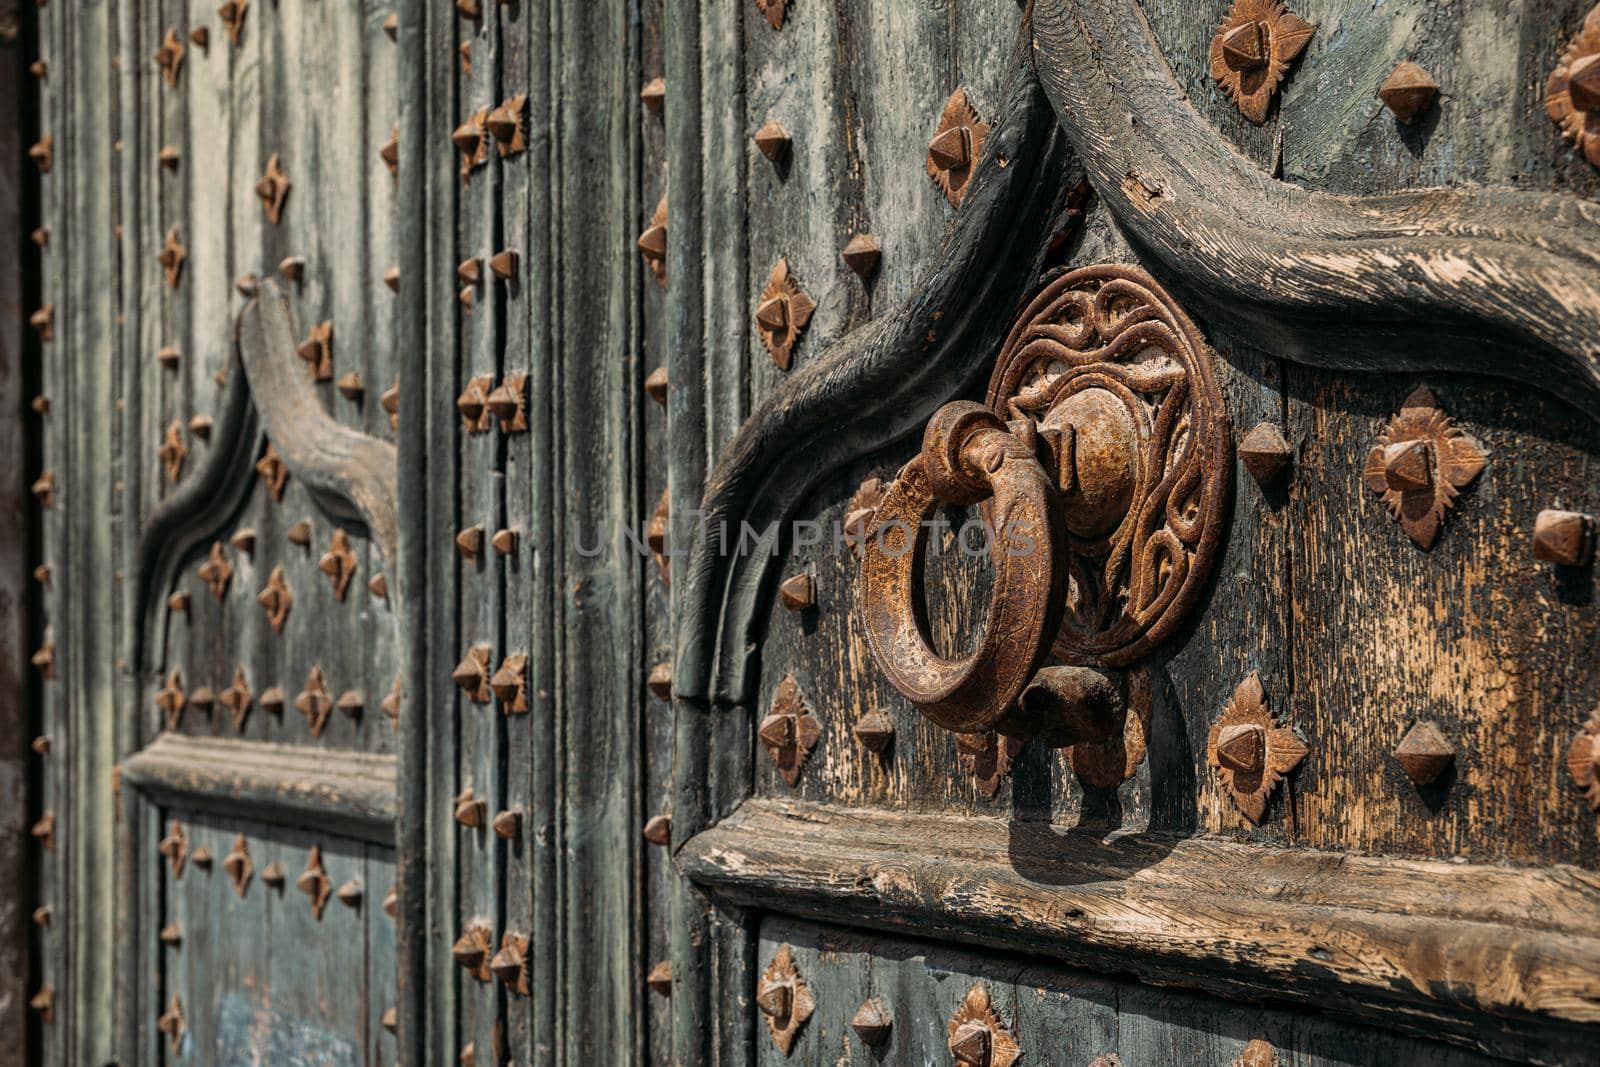 Details of portal to Cathedral. Metal knocker on wrought iron reinforced old wooden doors to Girona Cathedral, Spain.